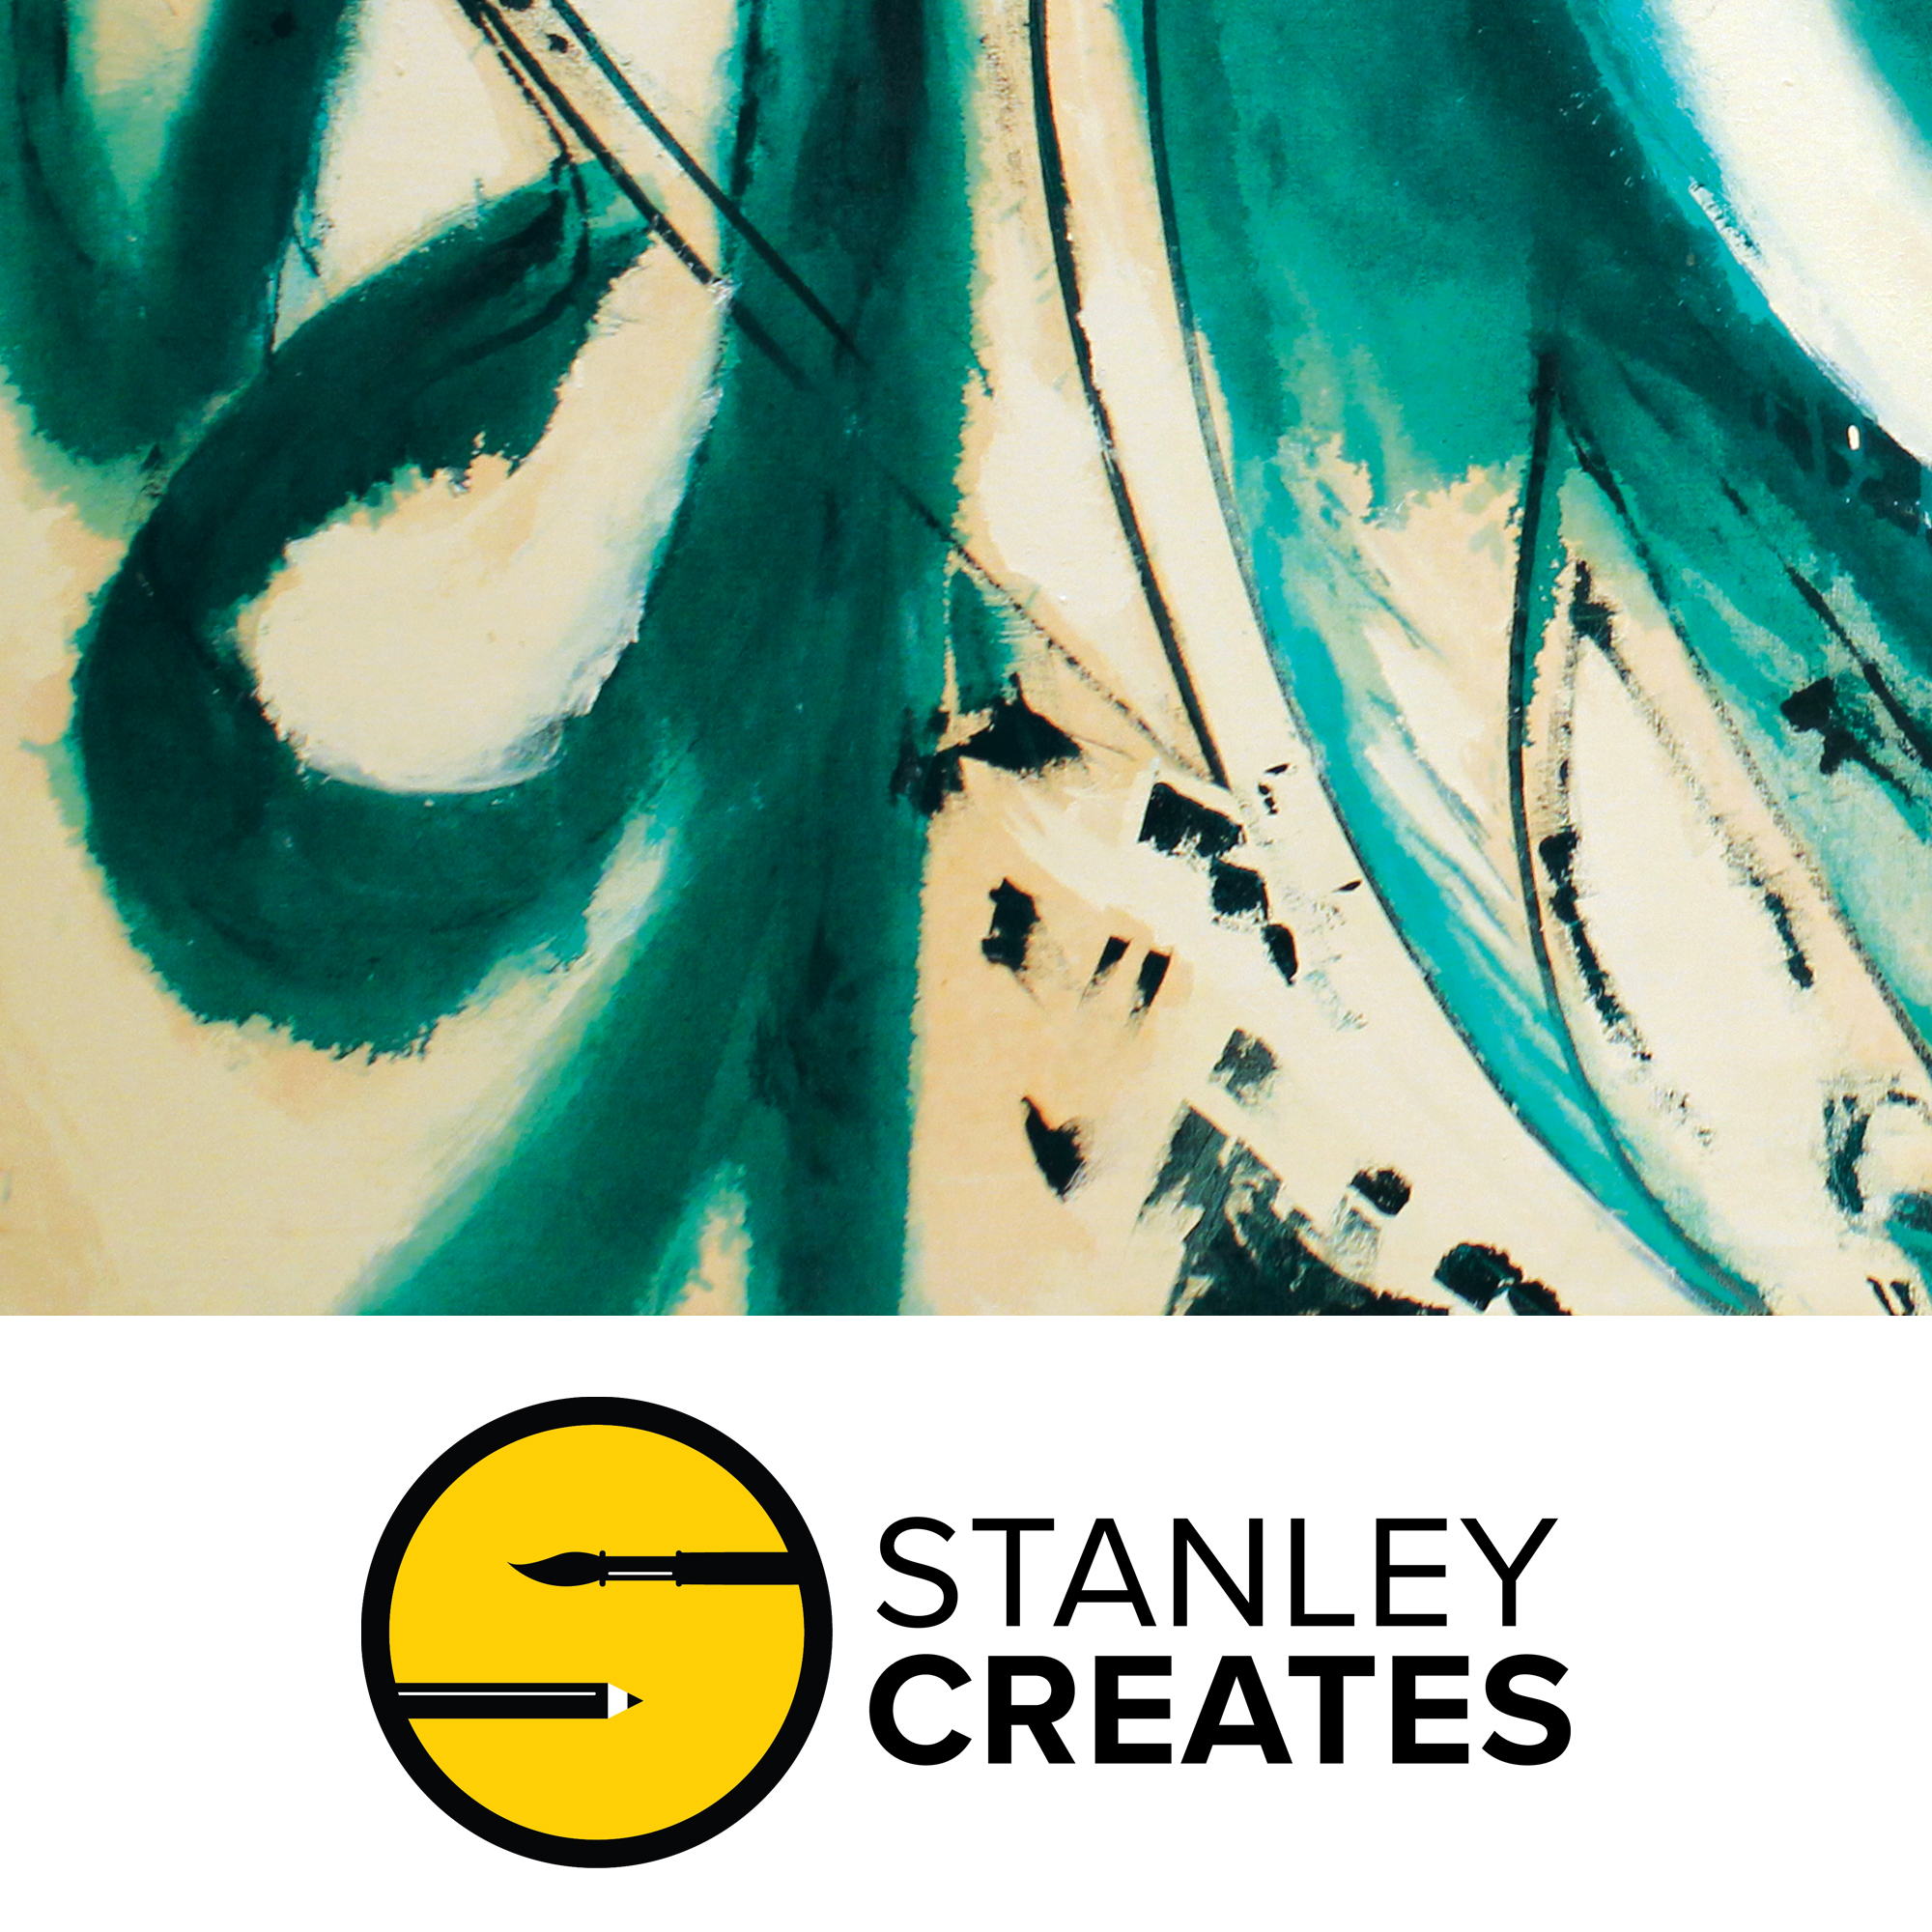 Green swirls above an icon that reads "Stanley Creates"